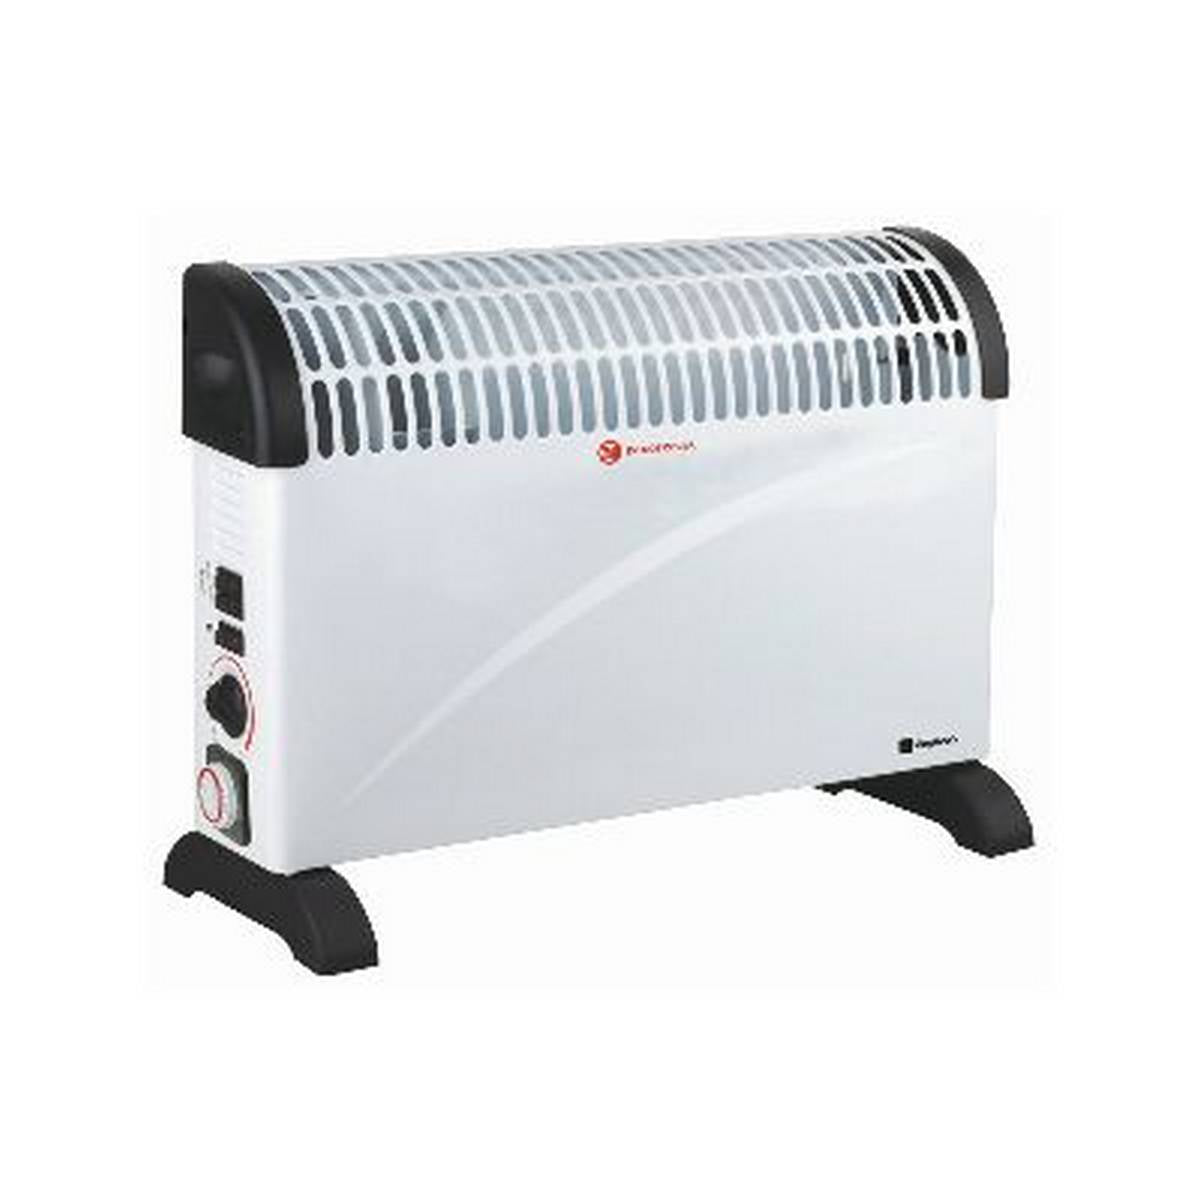 KINGAVON 2KW CONVECTOR HEATER WITH TURBO AND TIMER BB-CH501